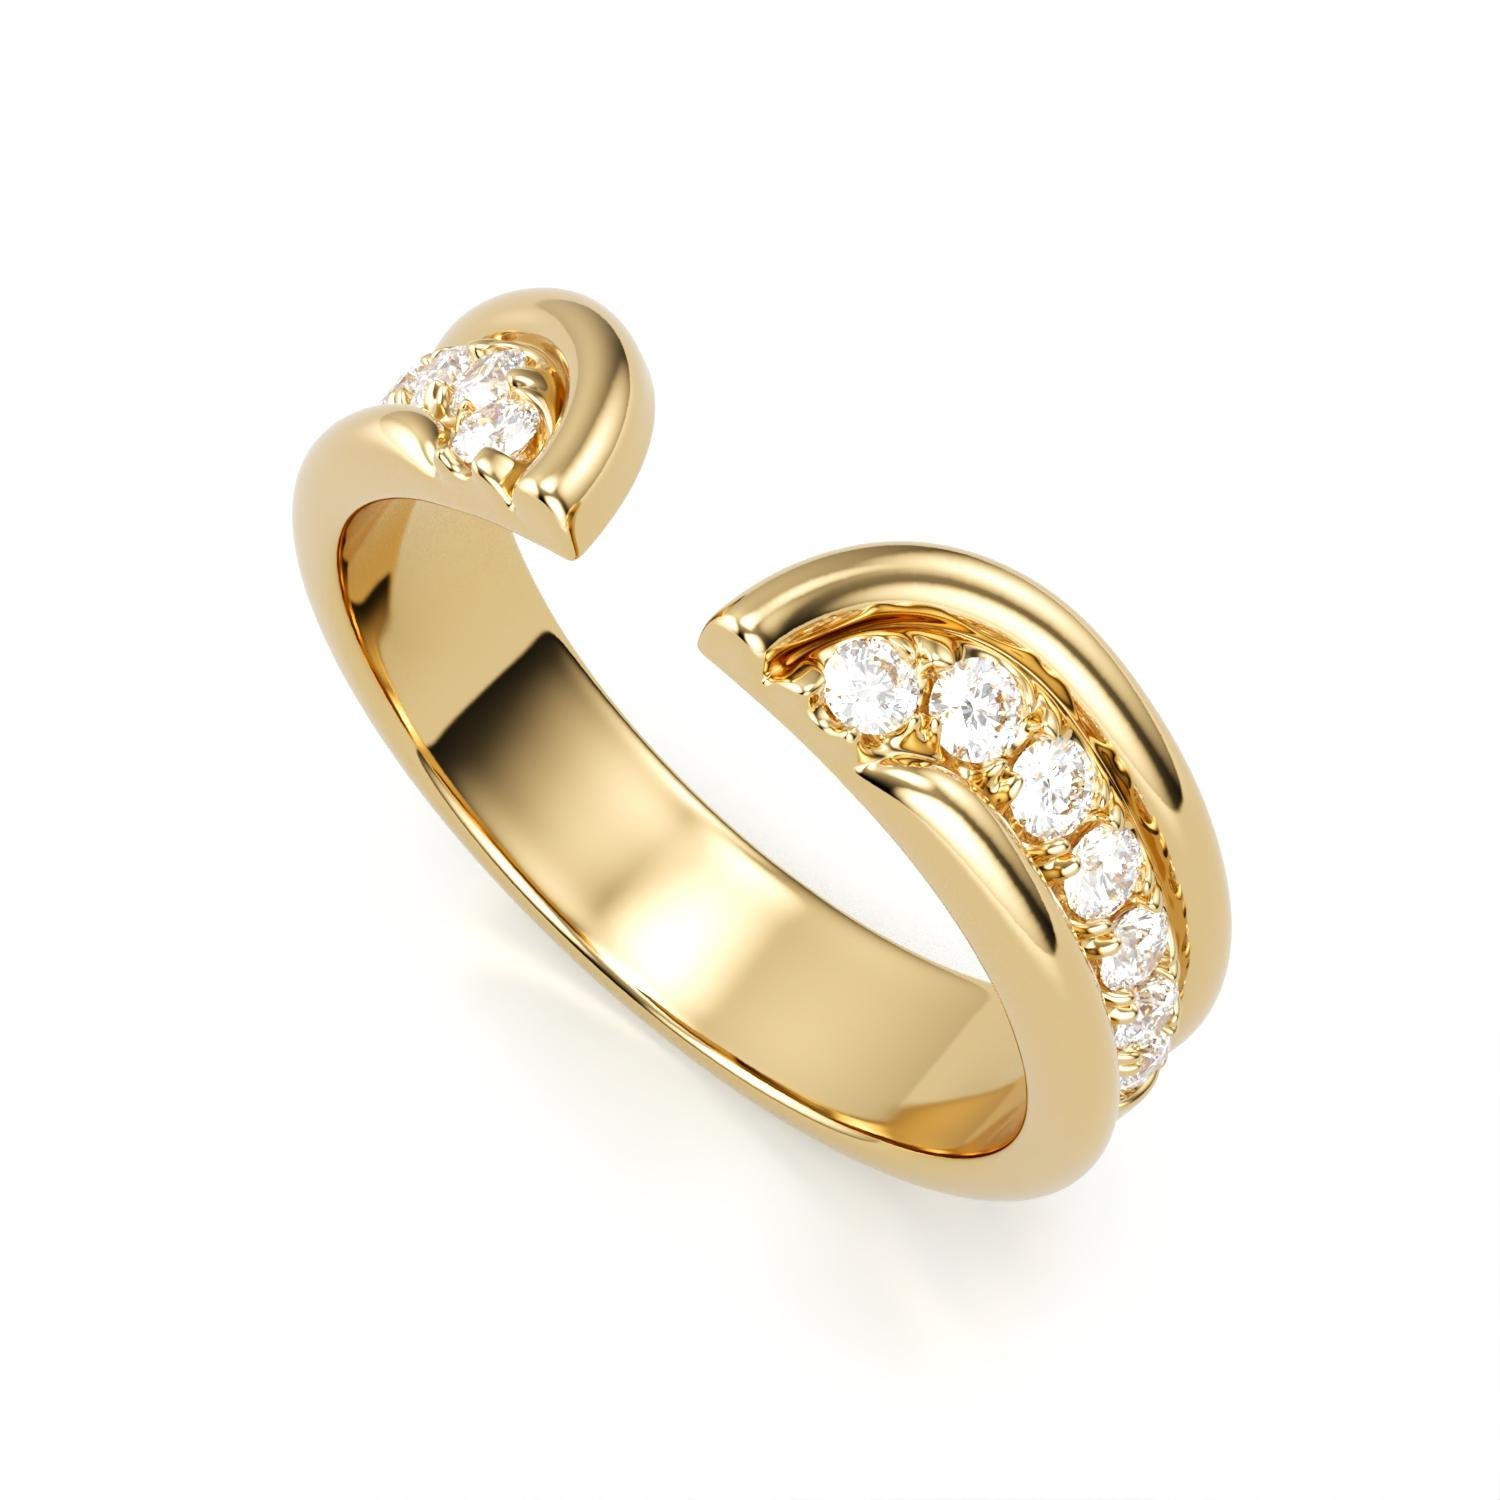 This modern yet minimal ring exudes understated cool and elegance. Meticulously crafted, its crisp banded detail surrounds a row of pave white diamonds that seamlessly curve and embrace the finger with a graceful flourish. This piece radiates an